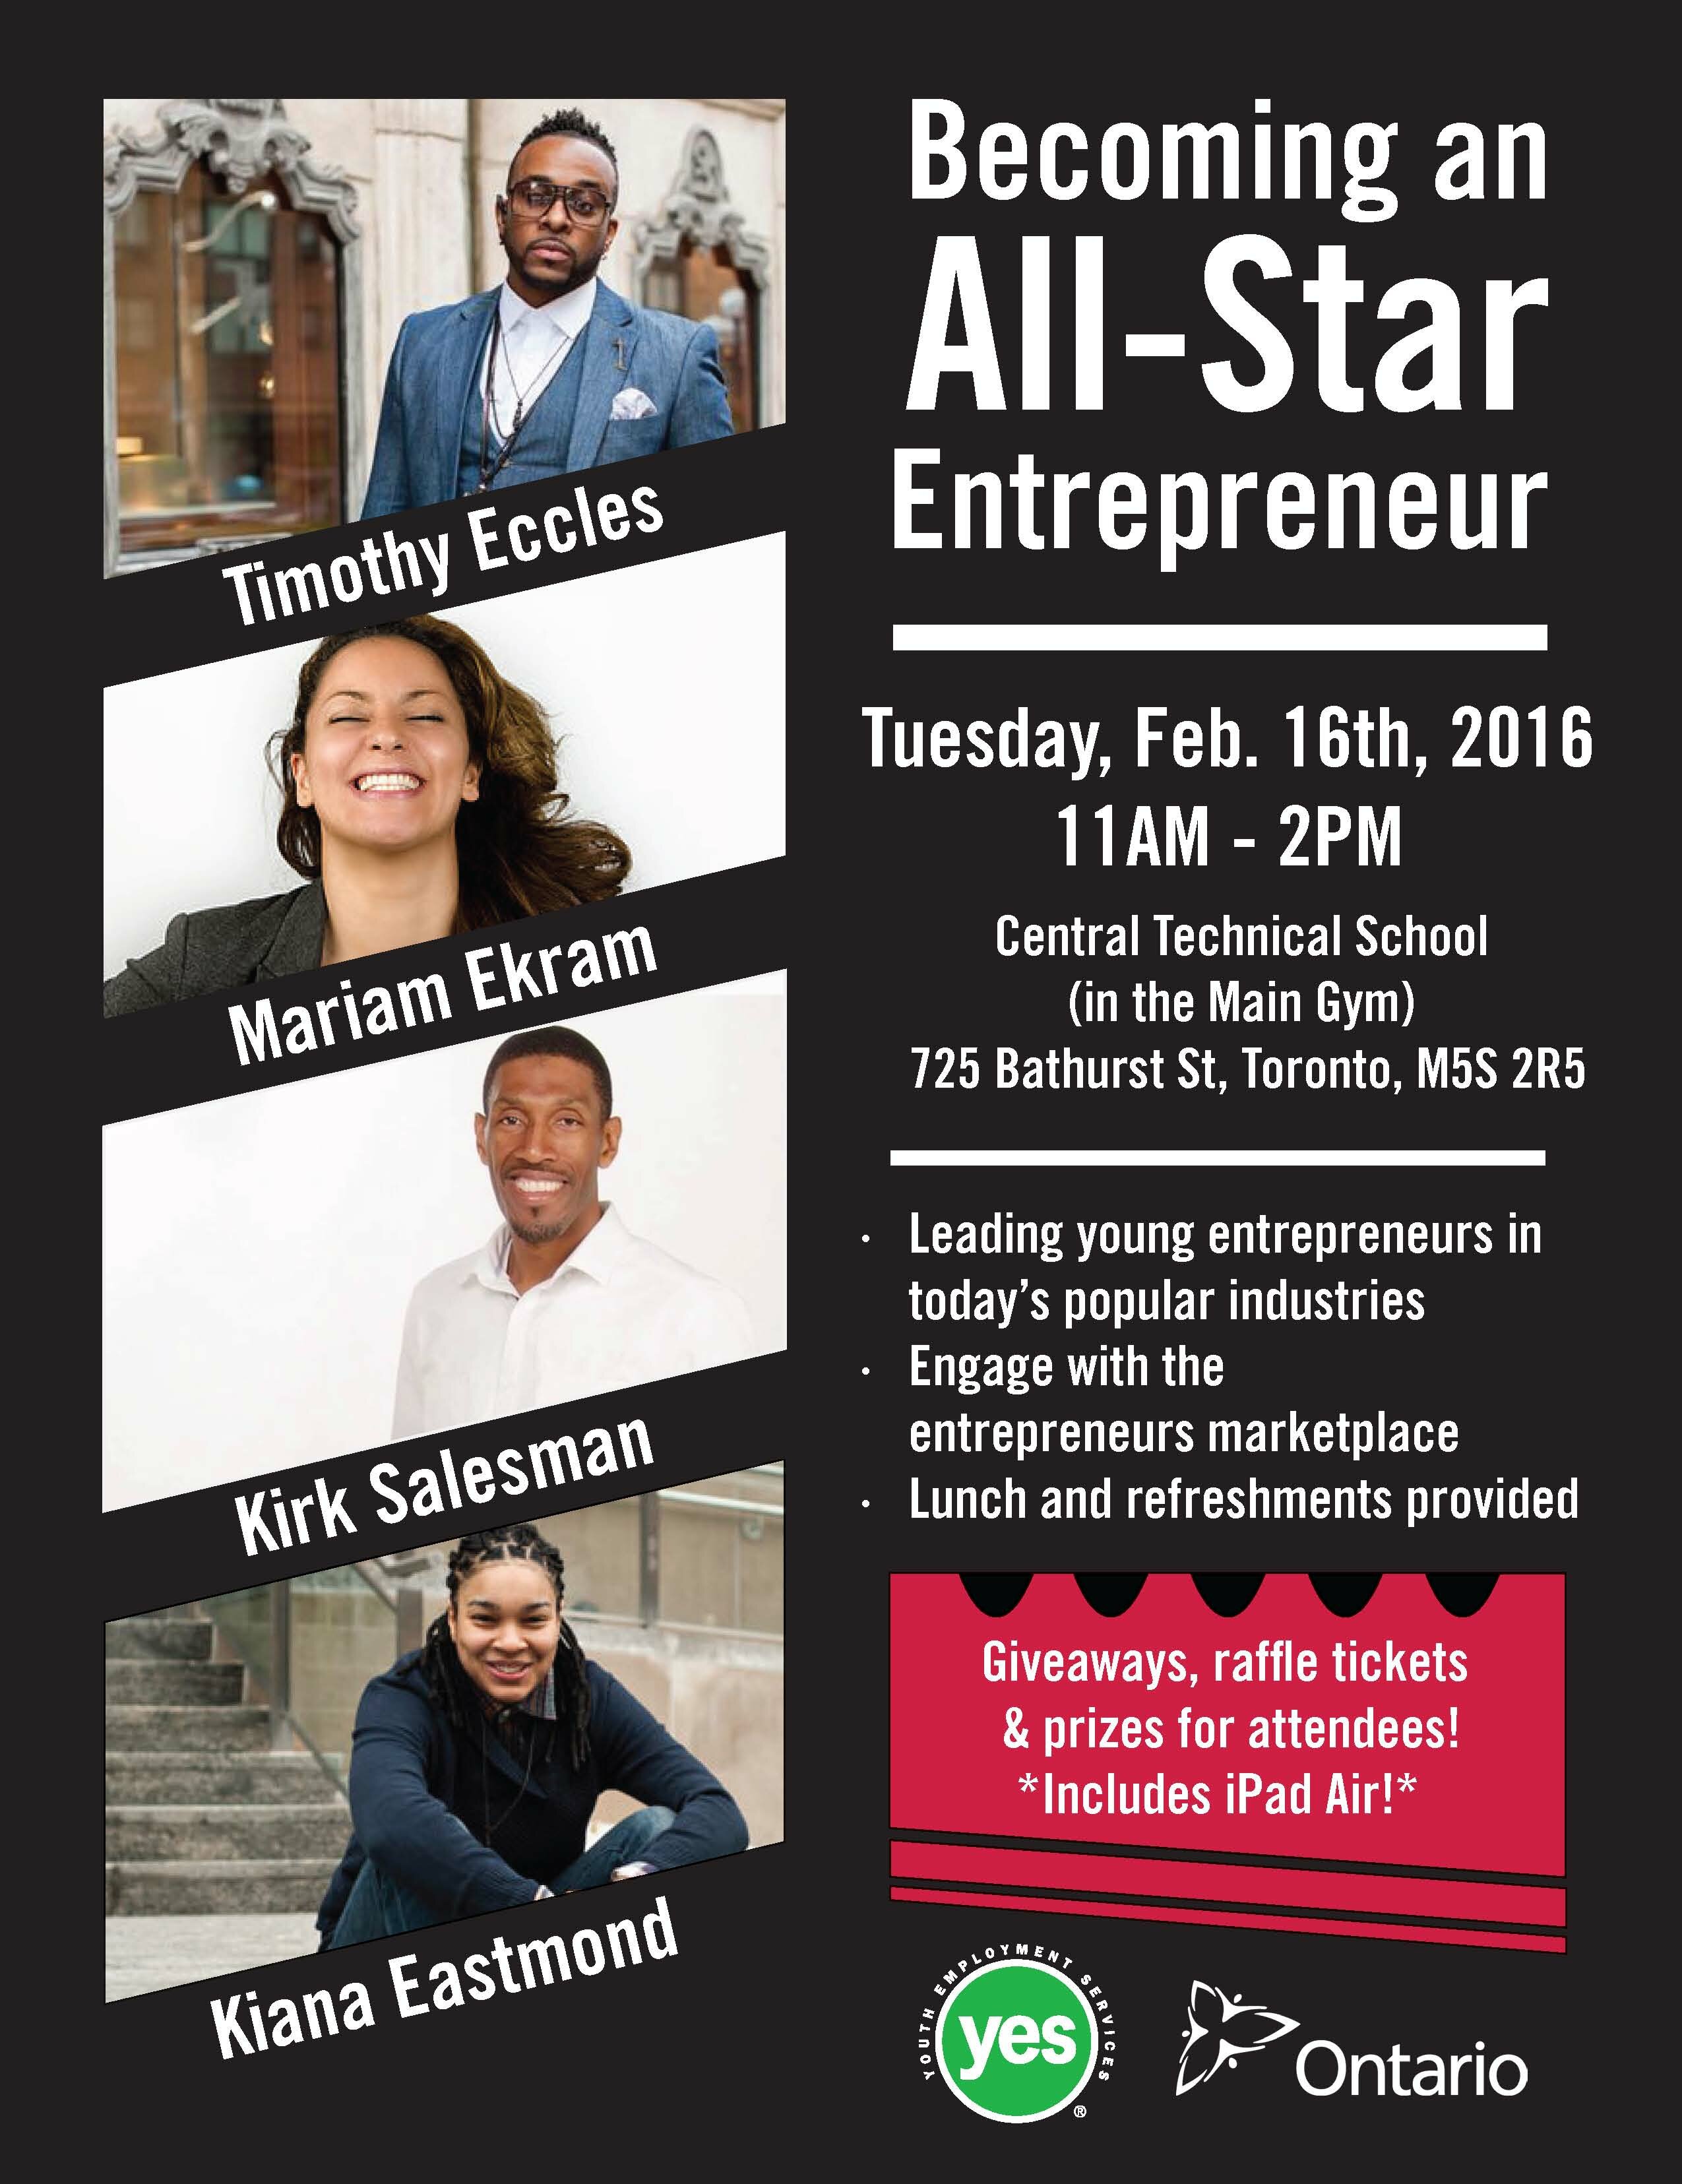 Becoming an All-Star Entrepreneur - Youth Employment Services YES